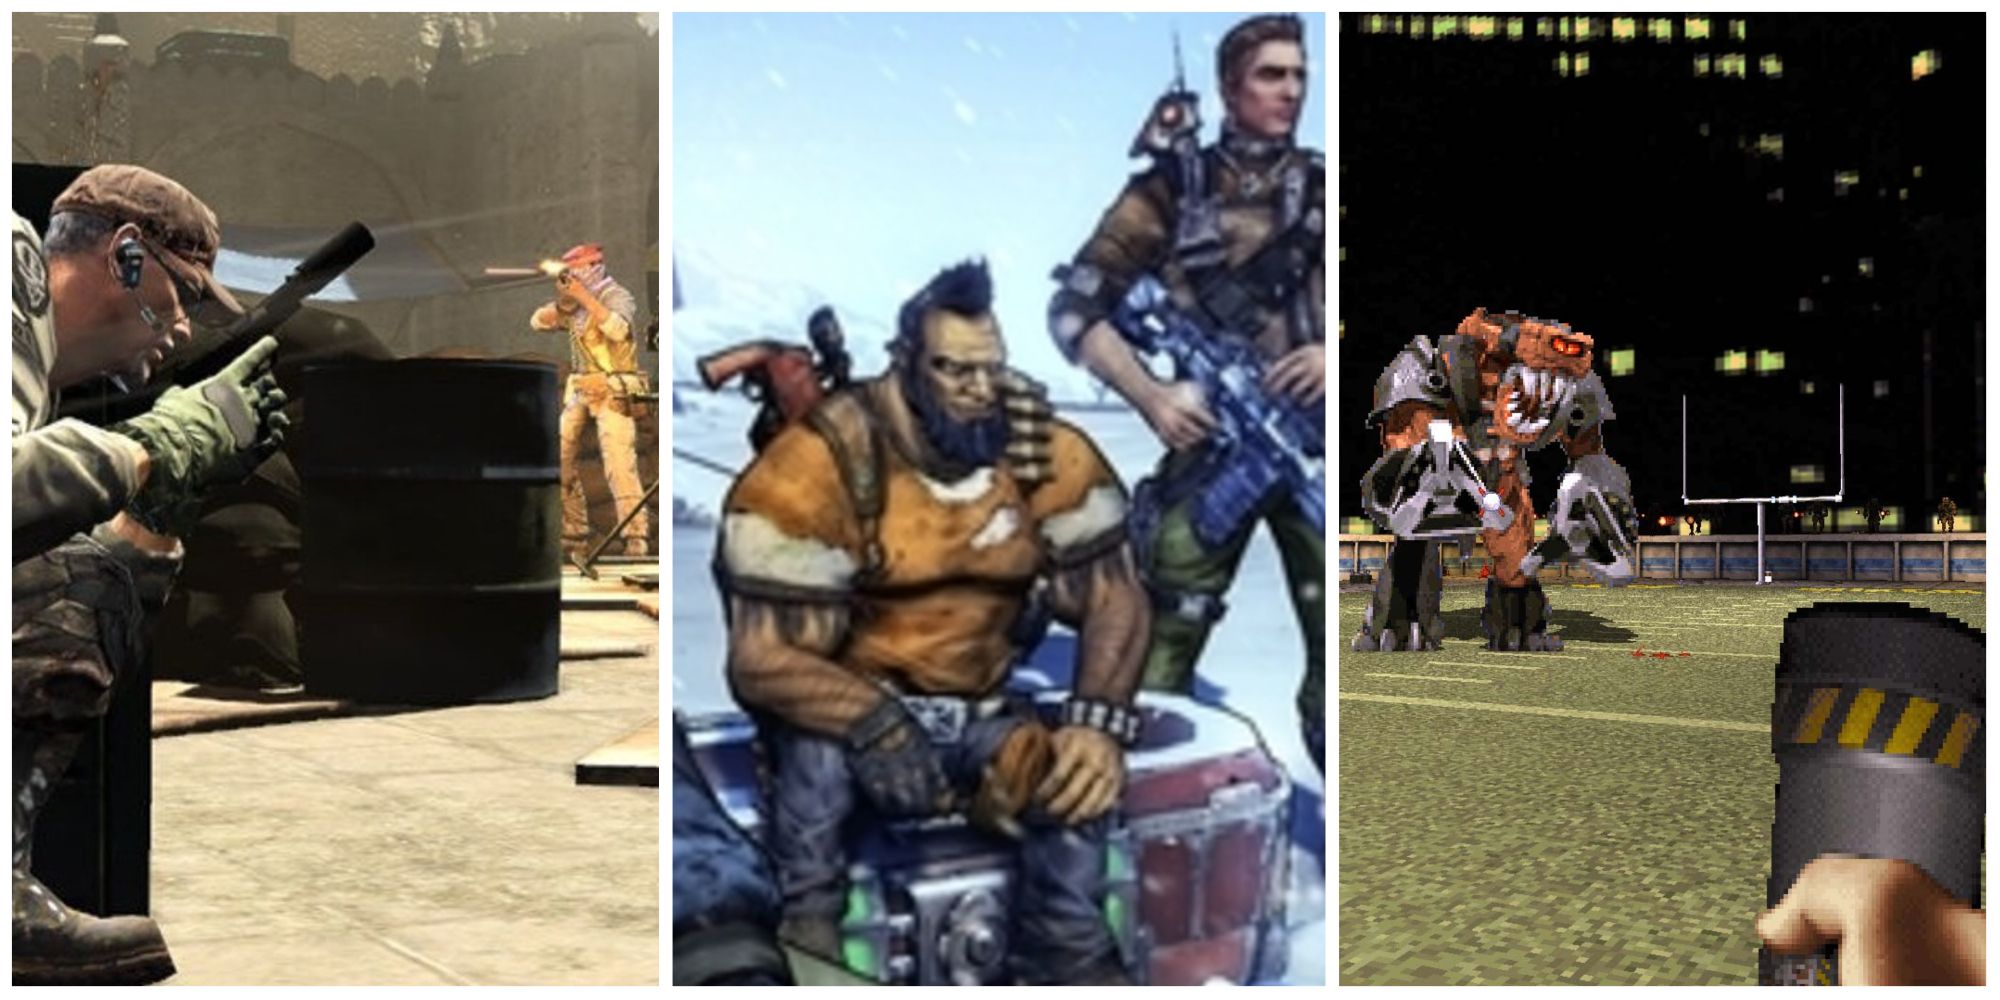 Gameplay images from Unit 13, Borderlands 2 and Duke Nukem 3D on PS Vita